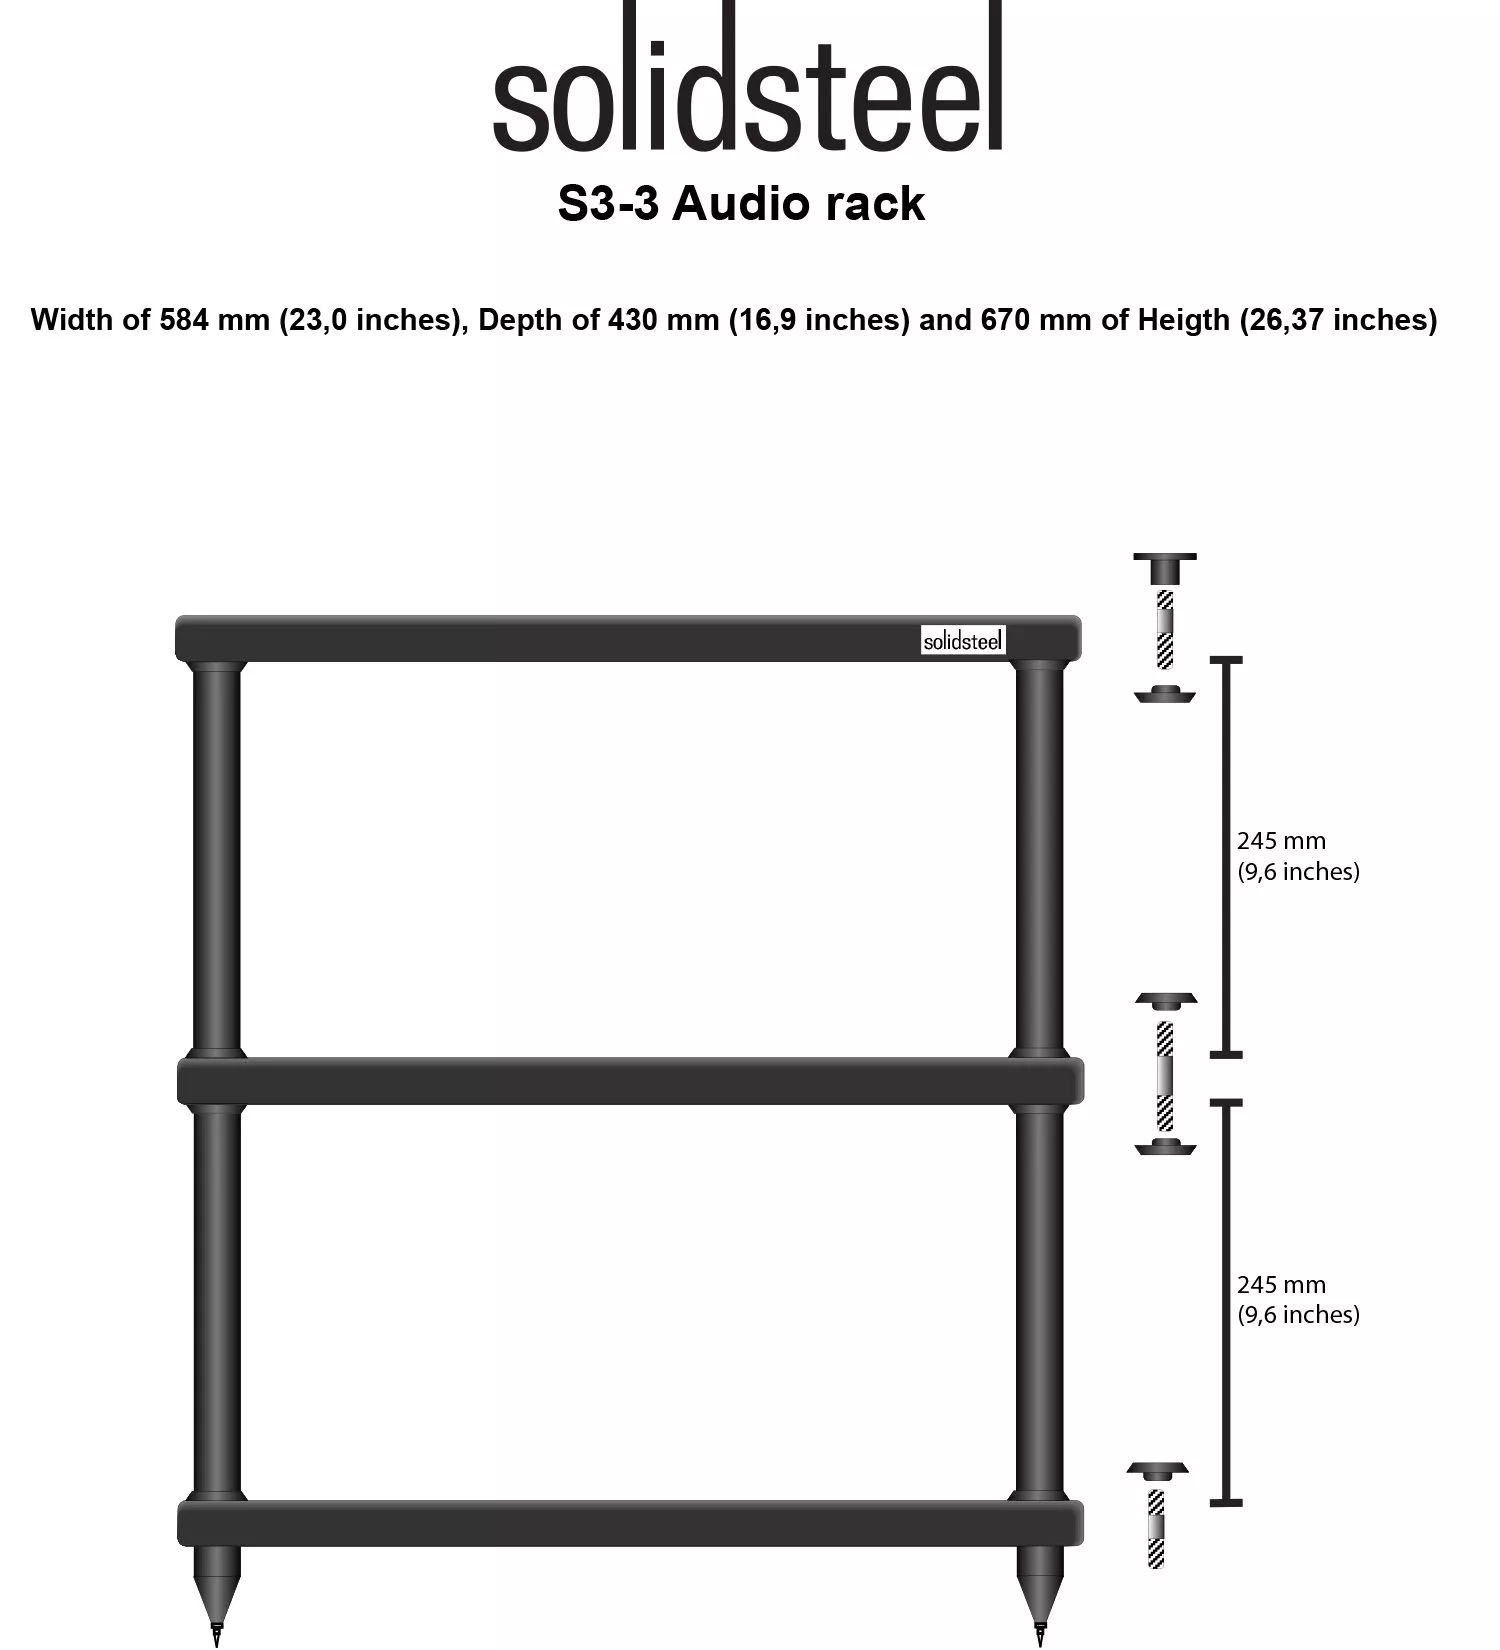  Solidsteel S3-3 taille dimensions rack